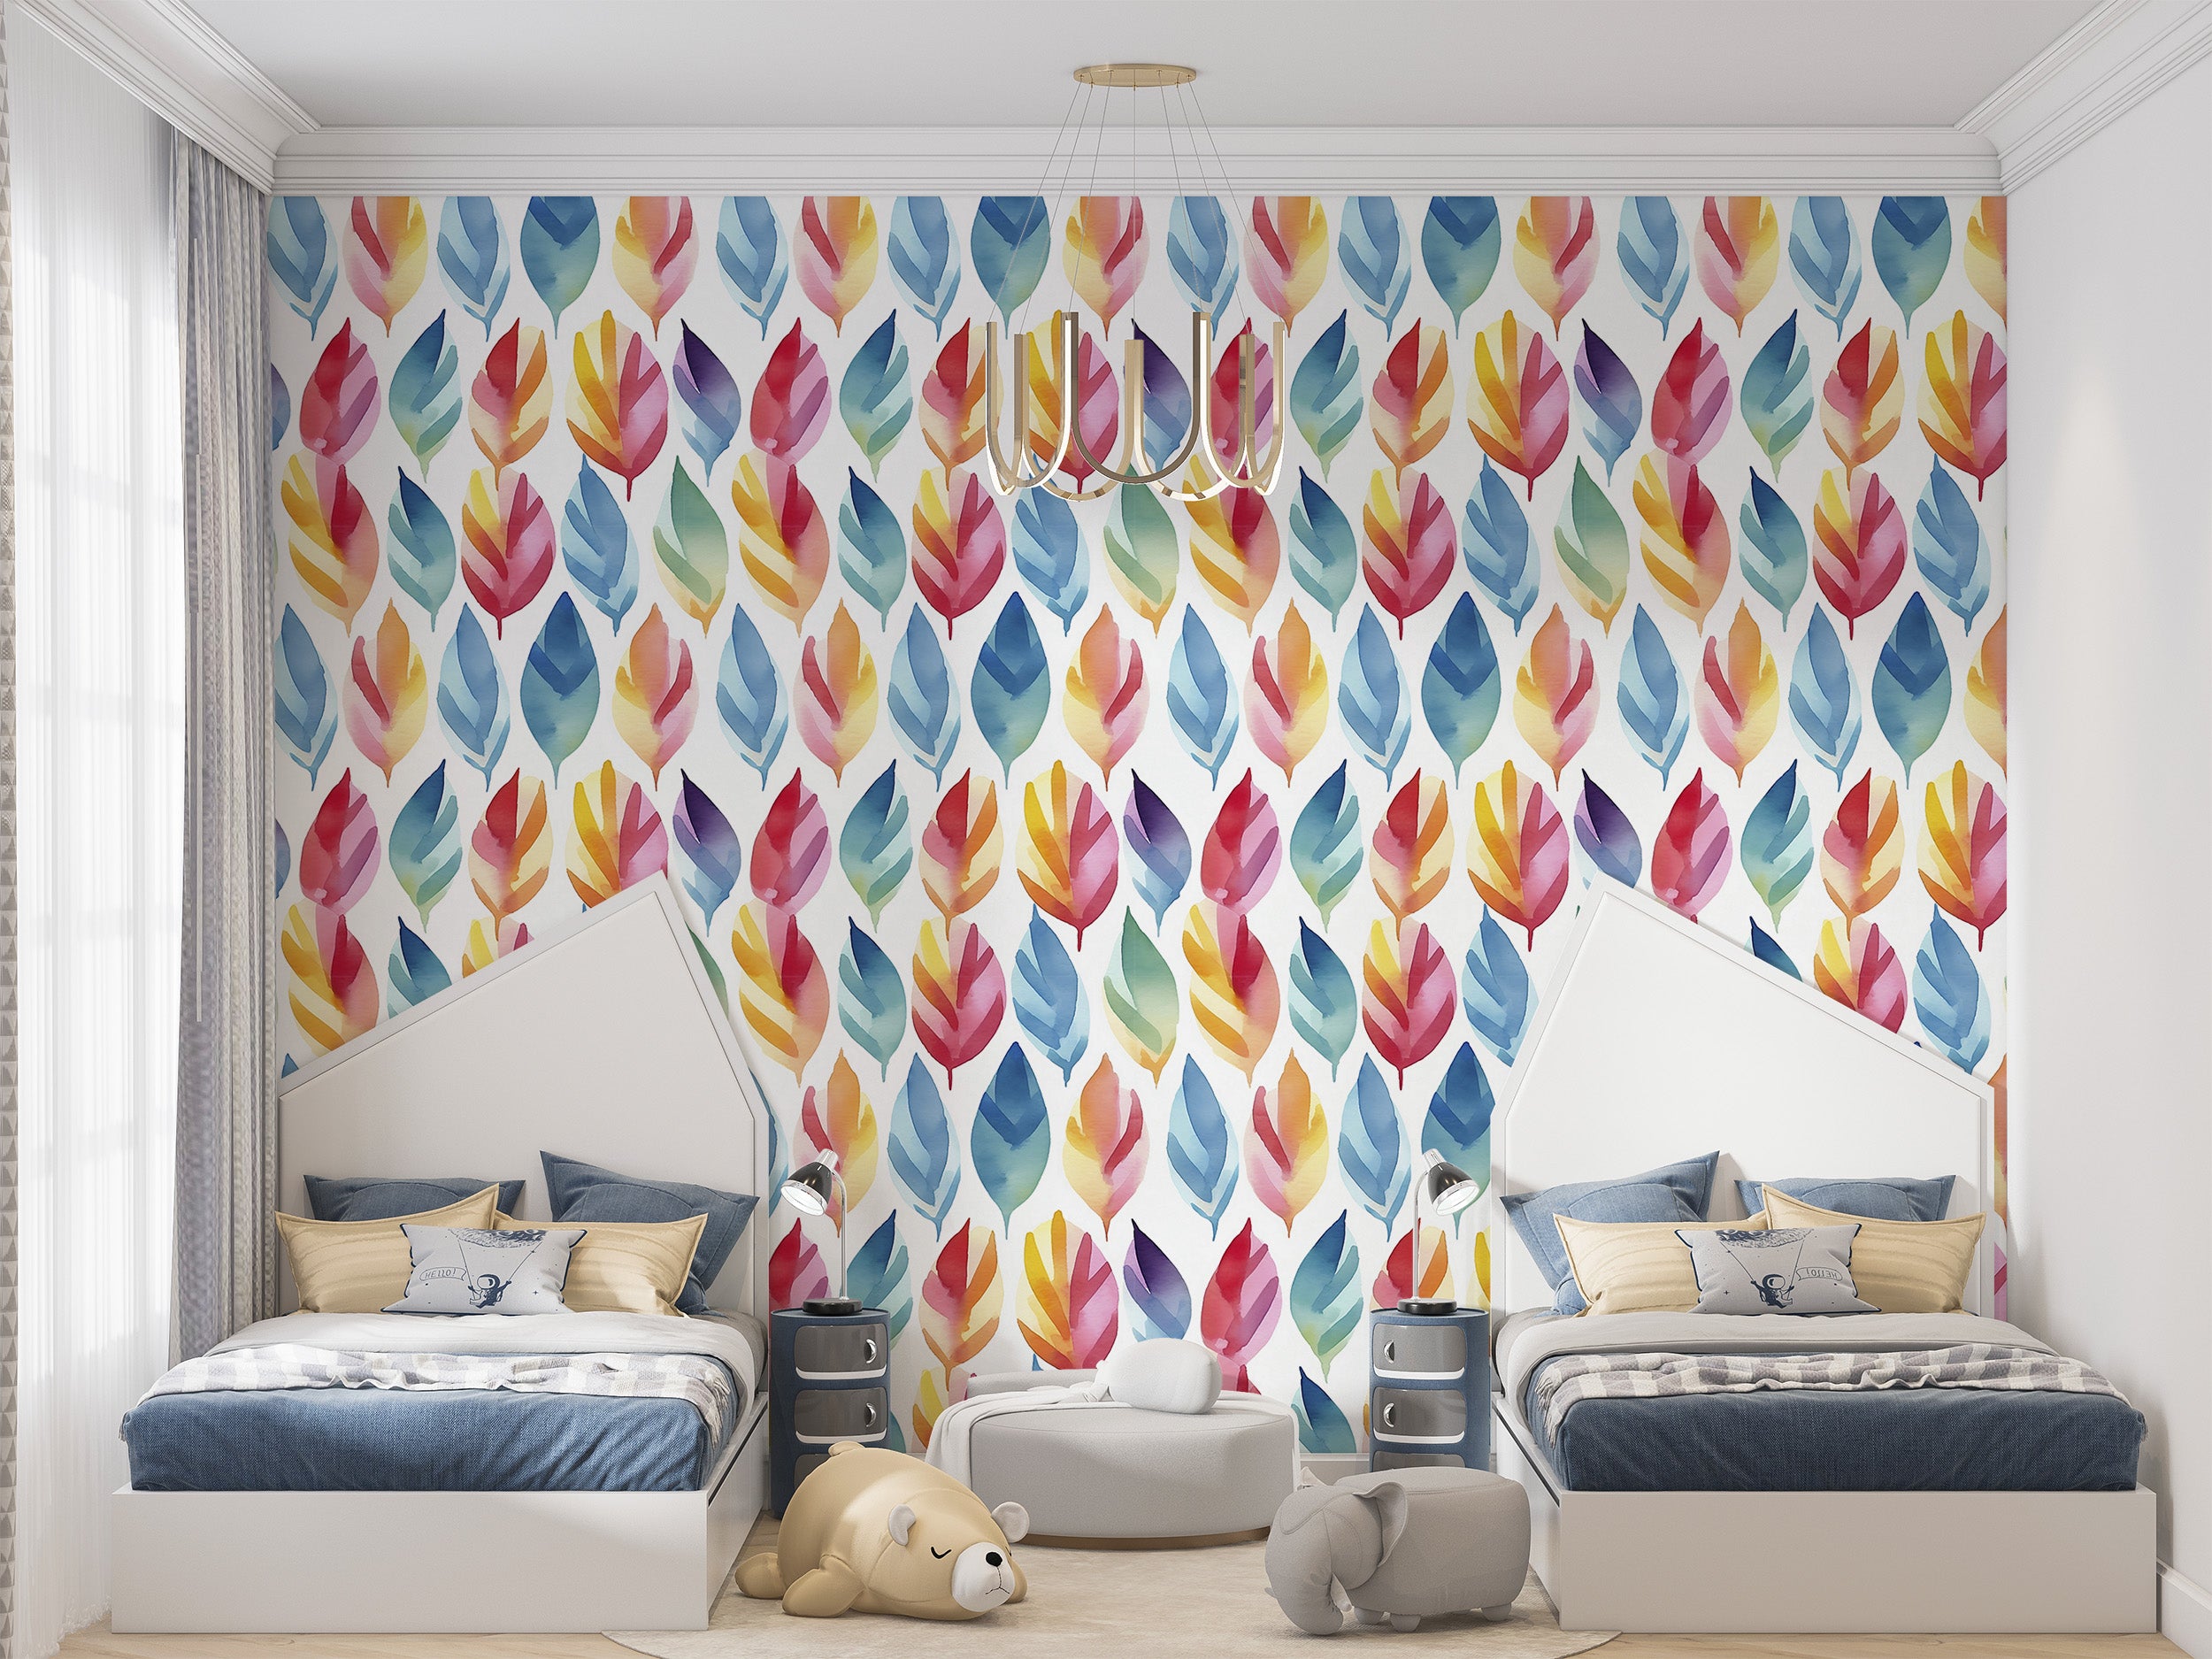 Effortless Application of Temporary Leaf Wall Decal